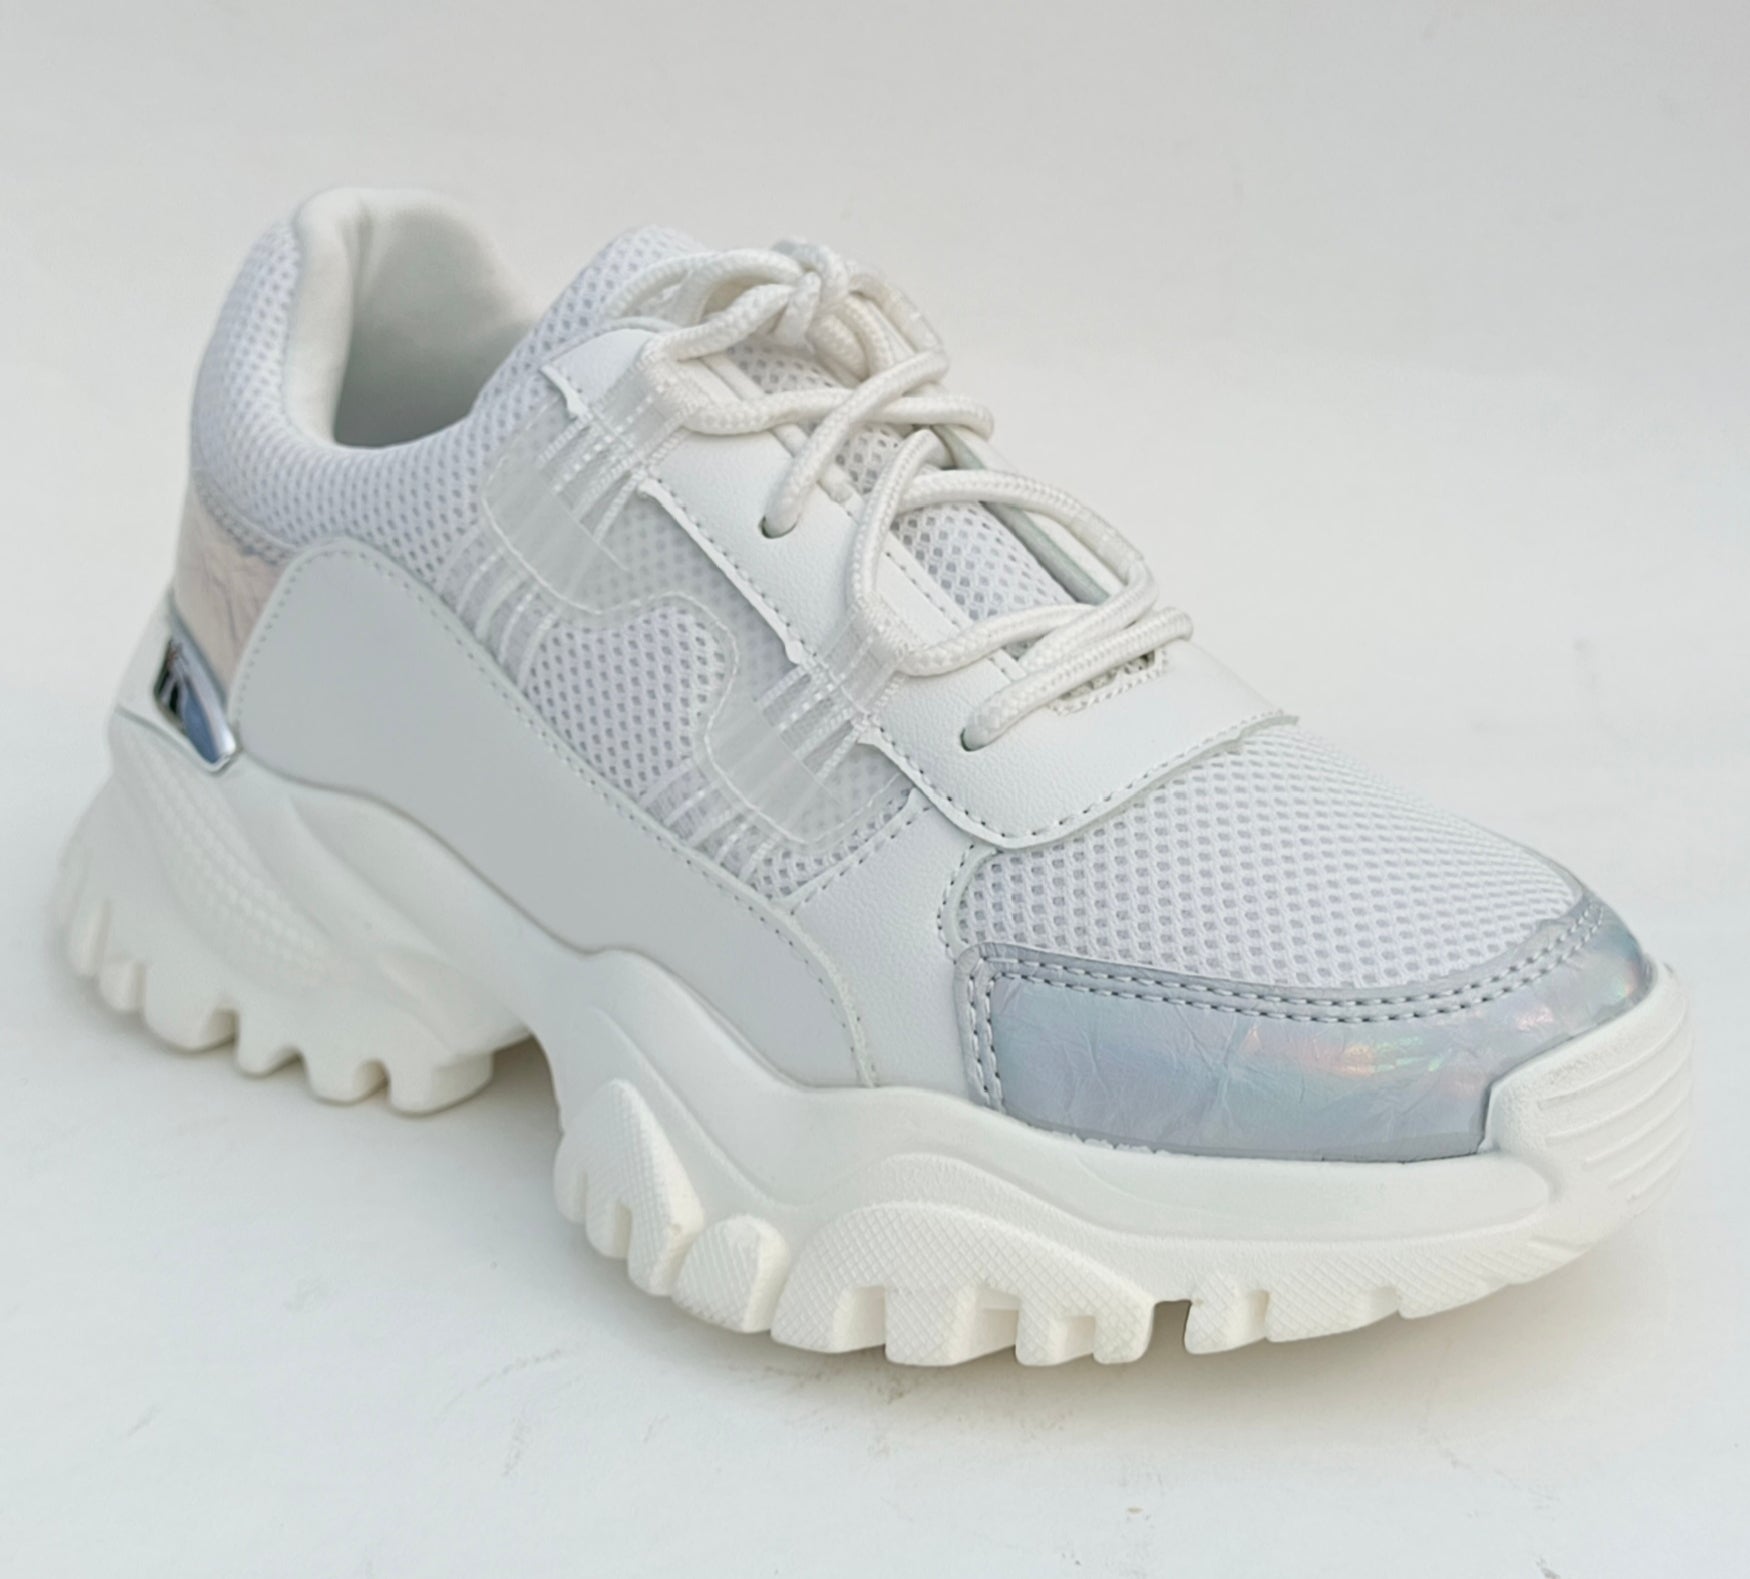 LUMPY SPACE PRINCESS-Sport Shoes in-White.